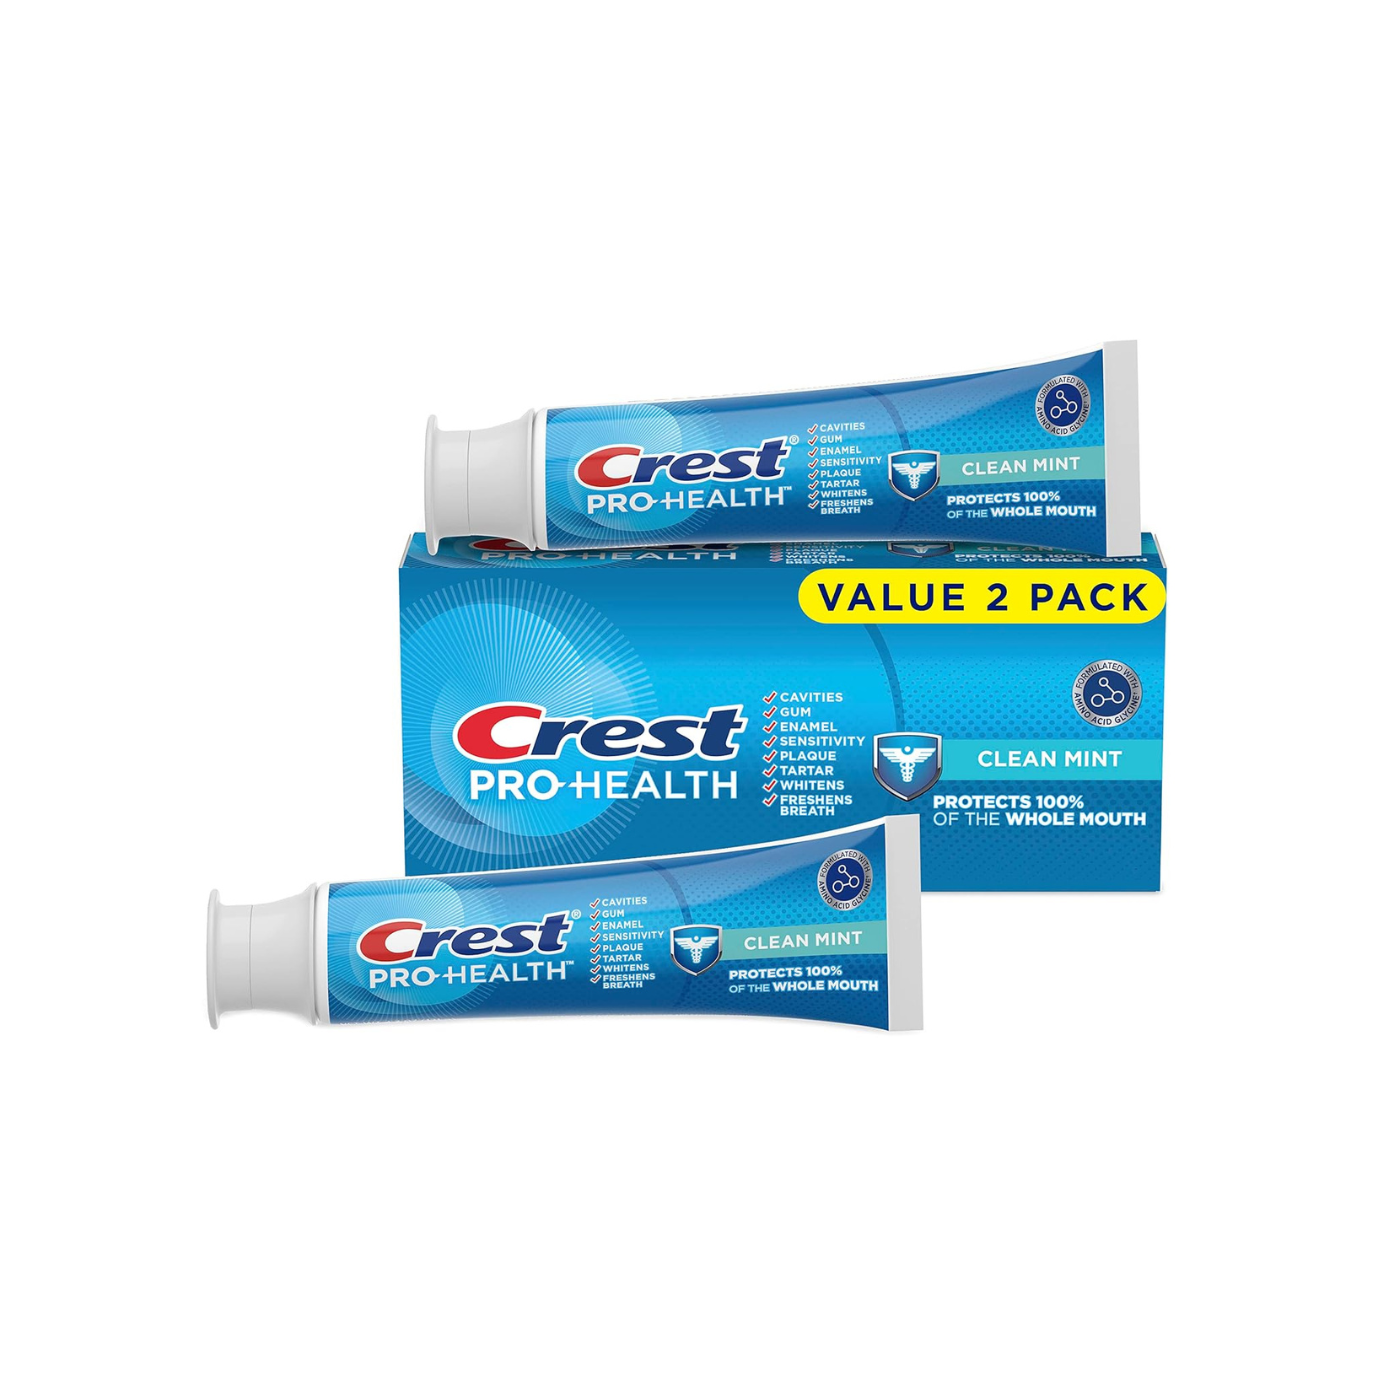 2 Pack Of Crest Pro-Health Clean Mint Toothpaste